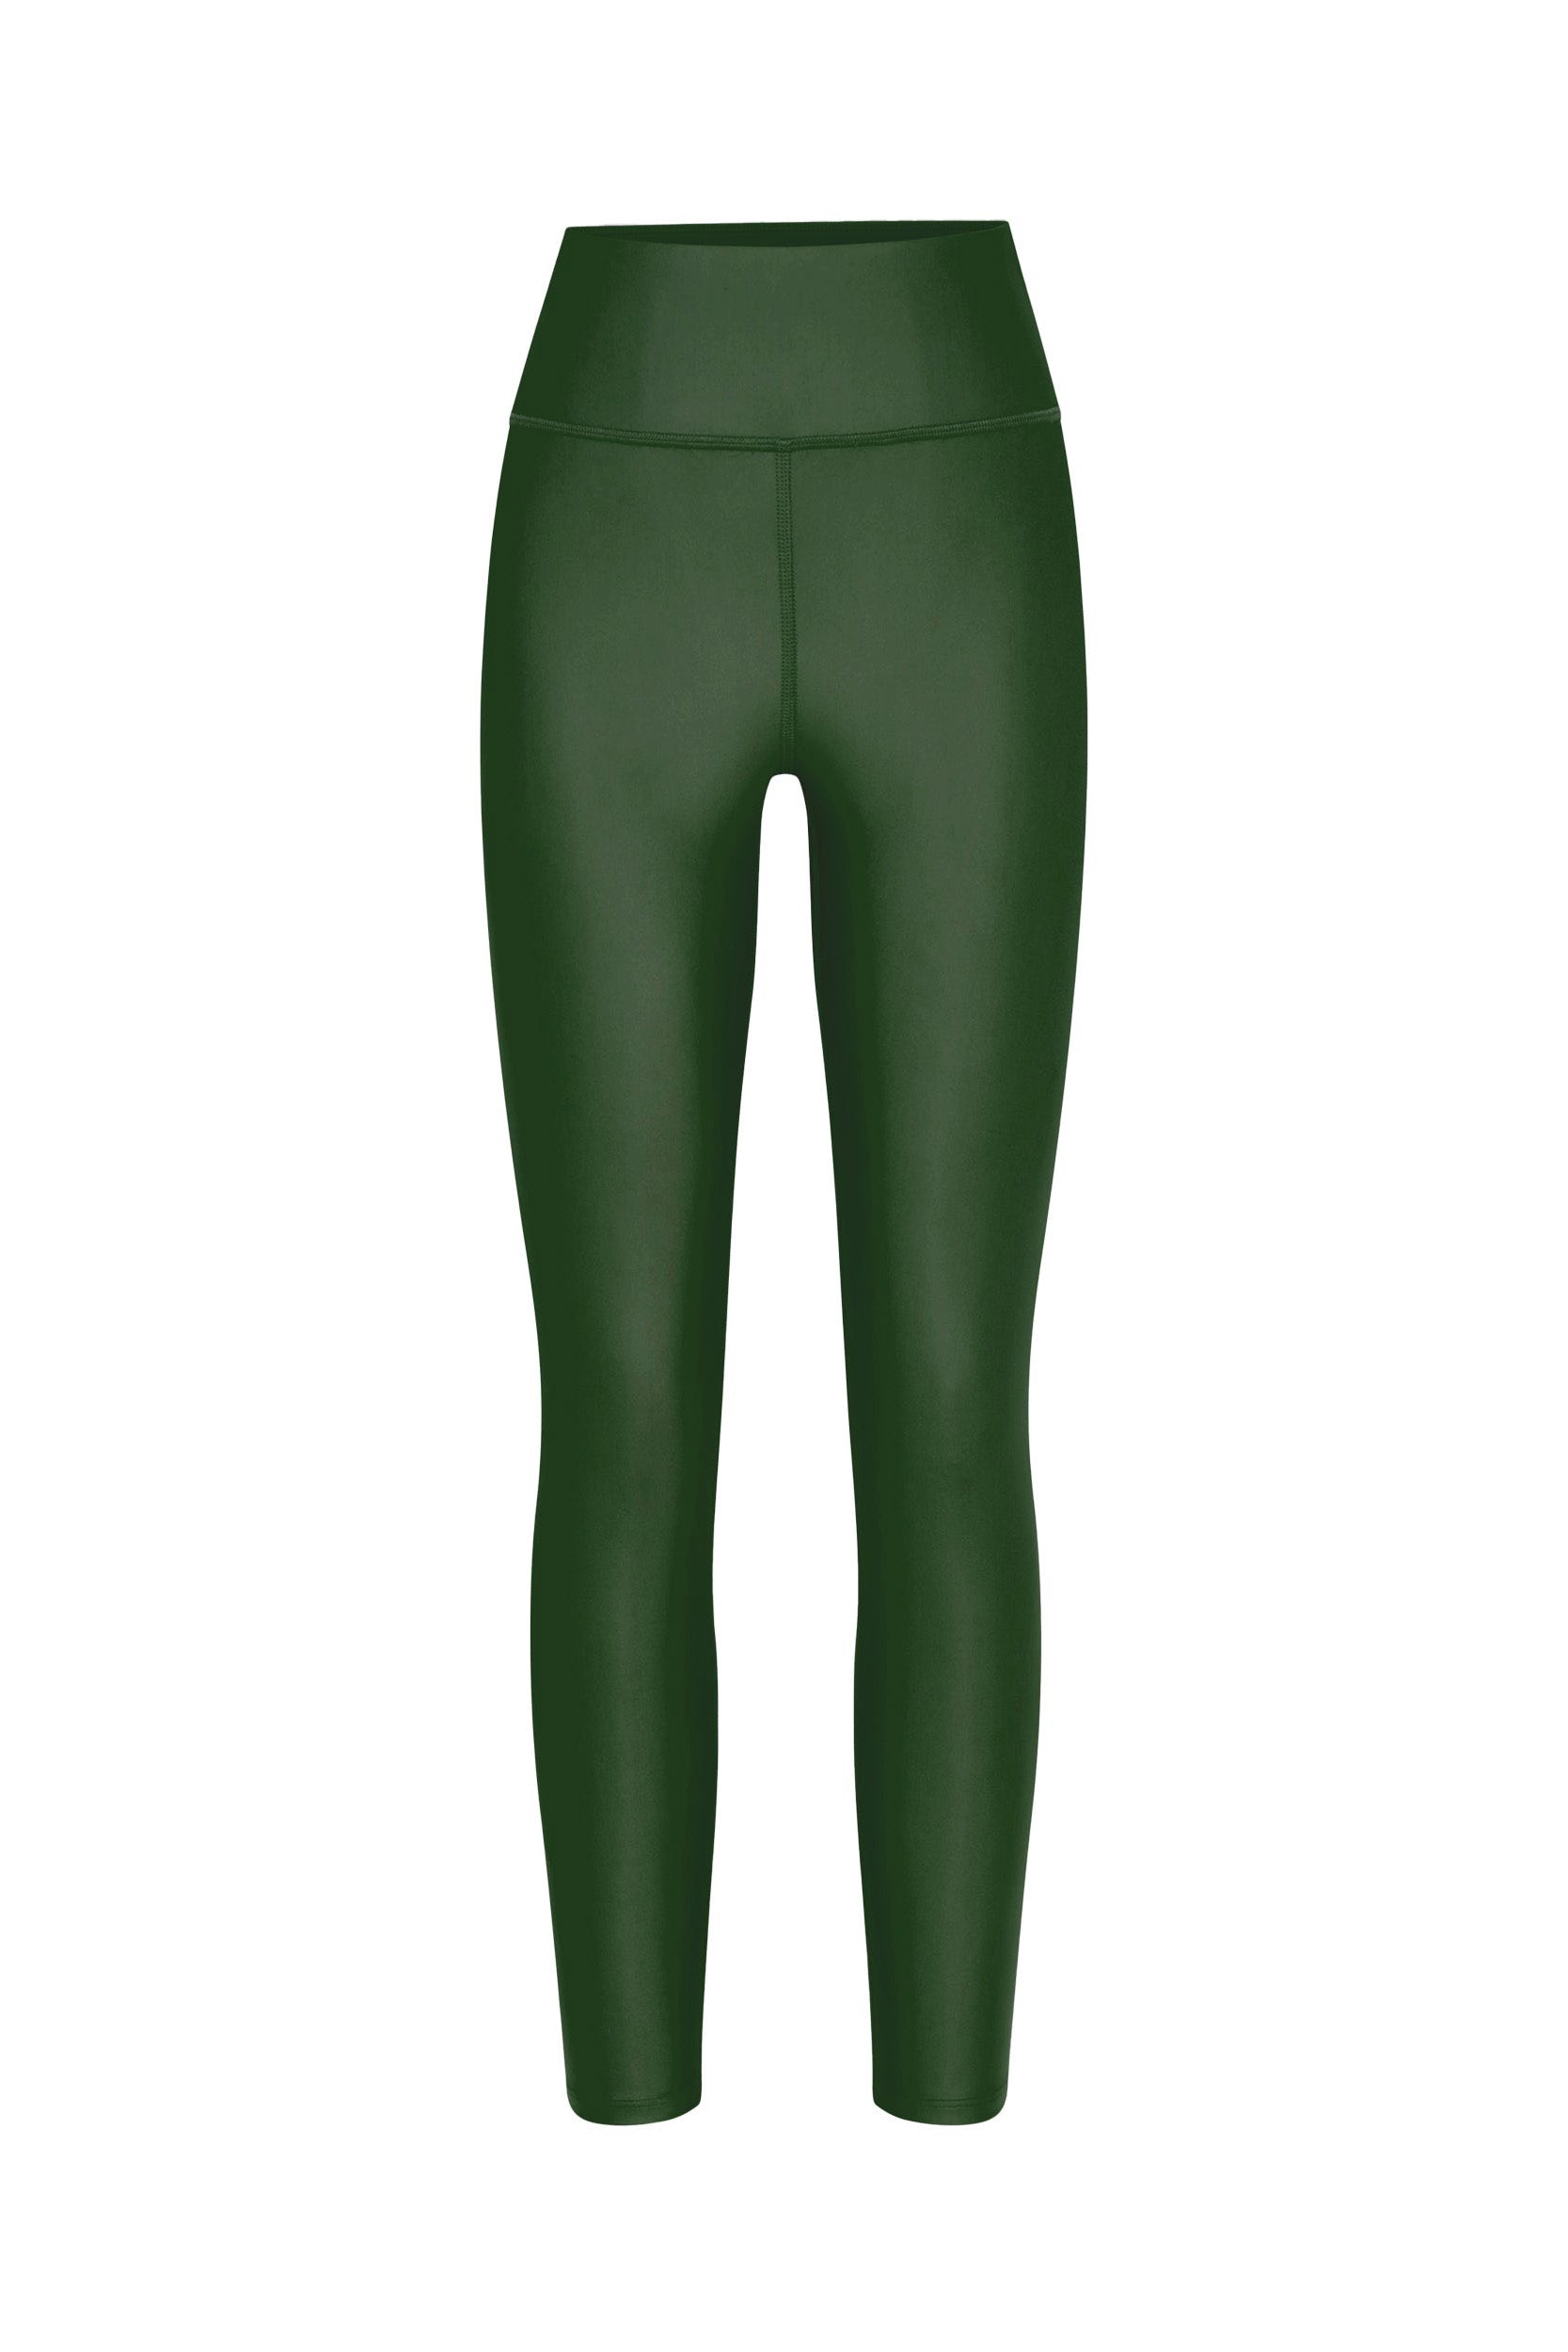 A pair of high-waisted Liquid Legging - Hunter is displayed against a white background. The dark green fabric appears smooth and fitted, perfect for activewear or casual wear. Boasting a sleek, minimalist design without any visible logos or patterns, these leggings are also squat-proof for added confidence.